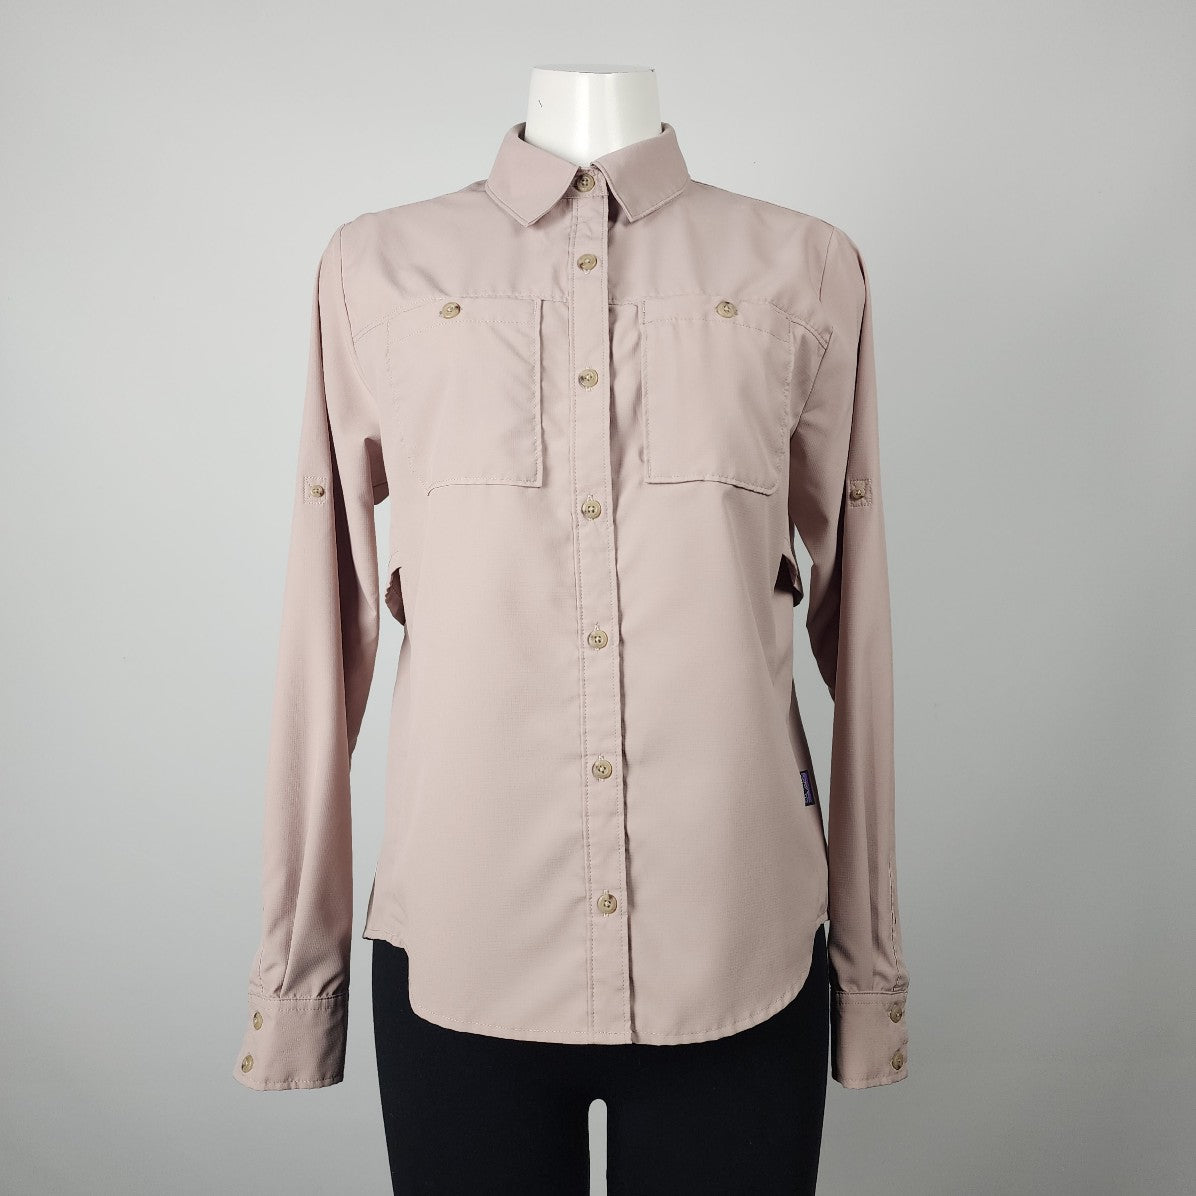 Patagonia Taupe Button Up Collared Top Size M